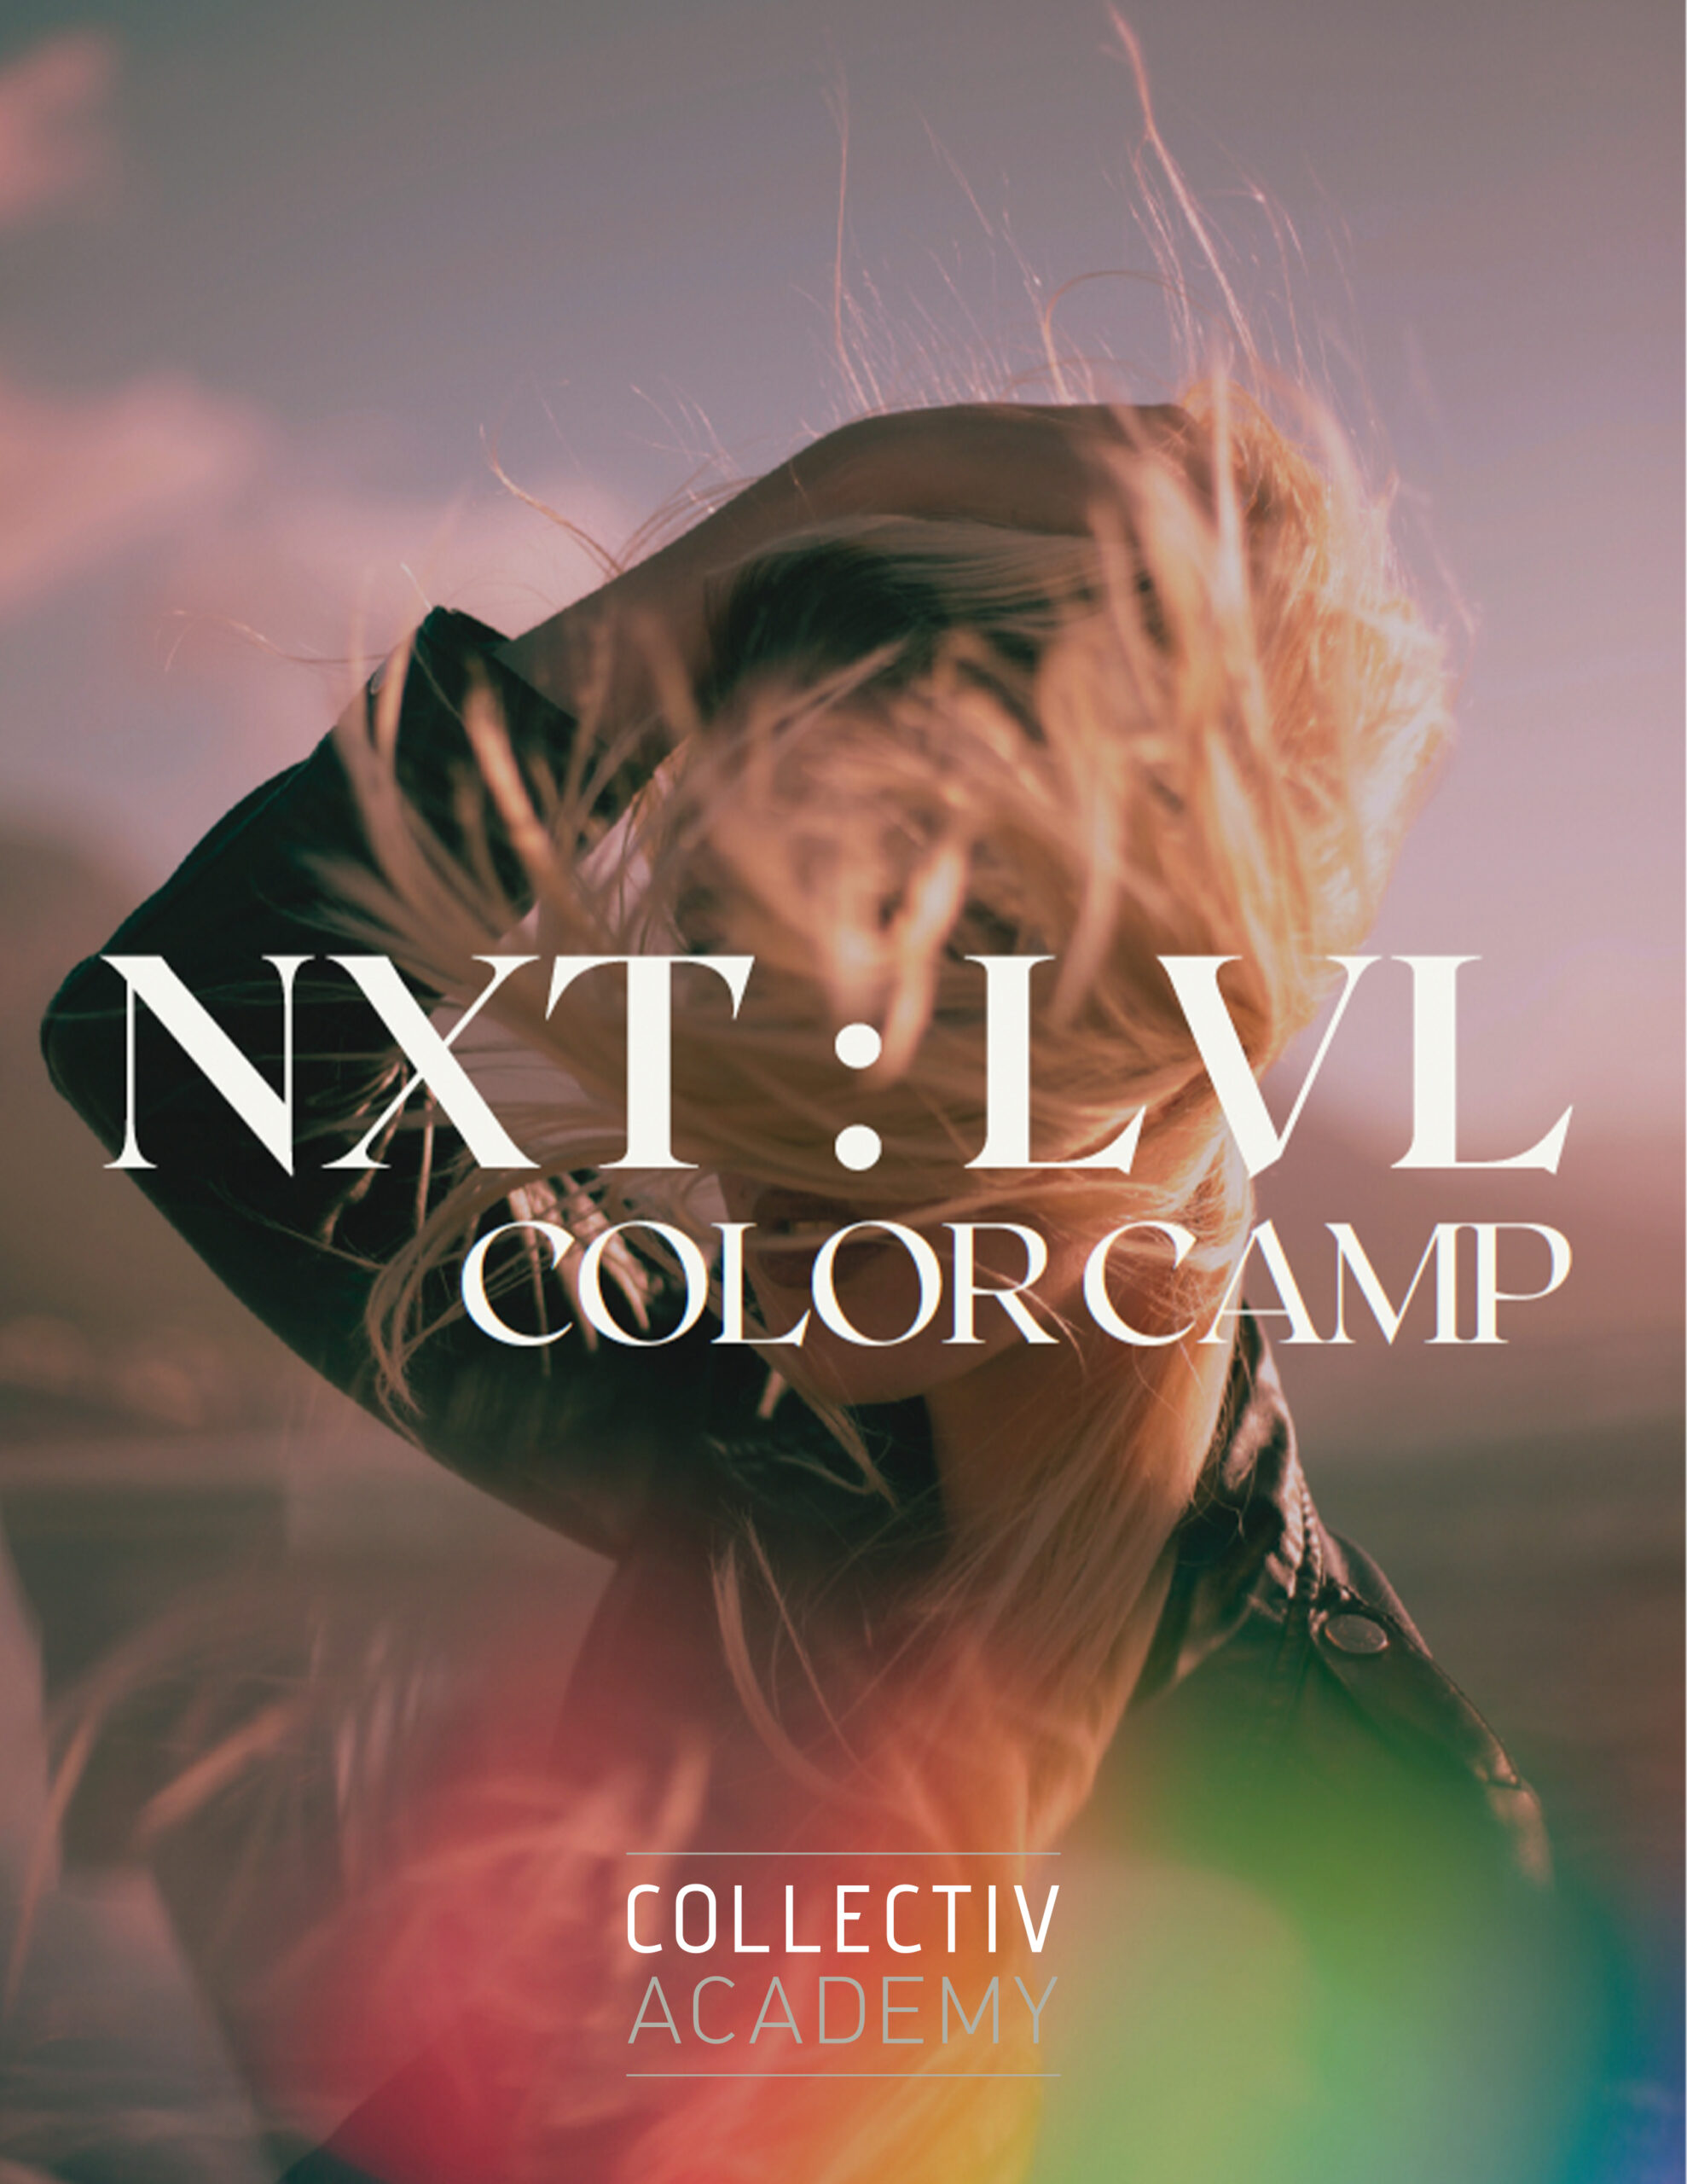 NXT: LVL COLOR CAMP